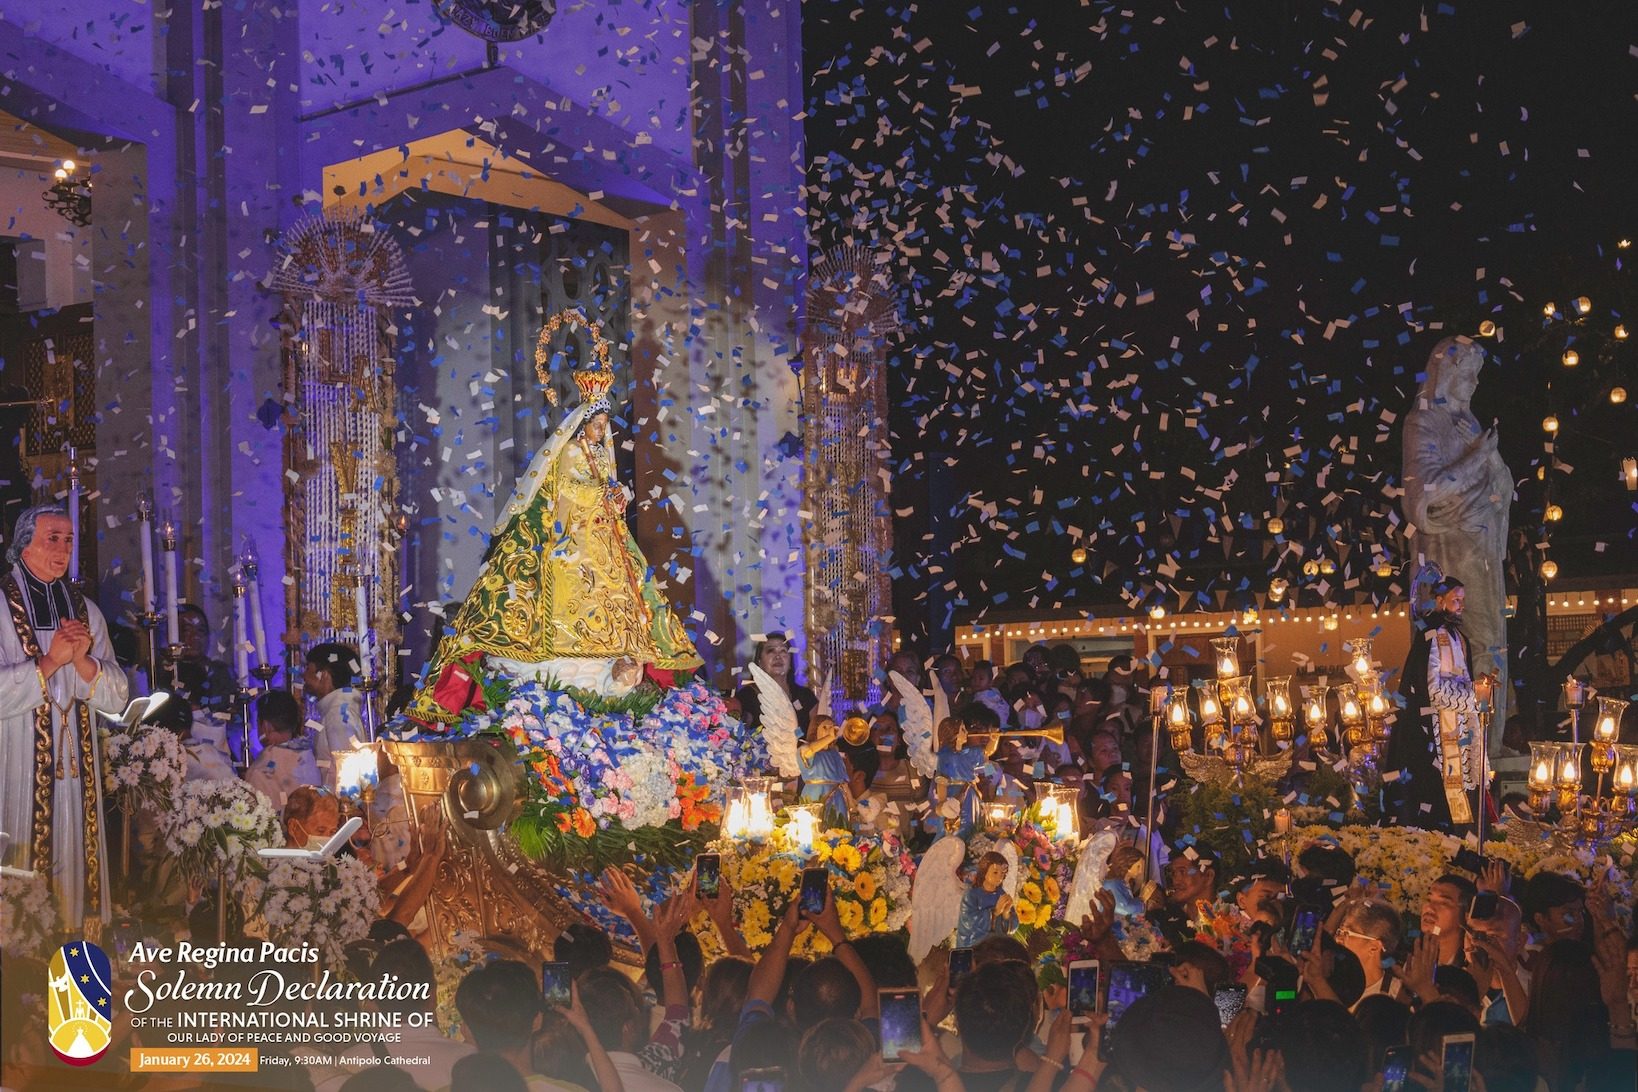 A good voyage: How the Antipolo Cathedral became an international shrine